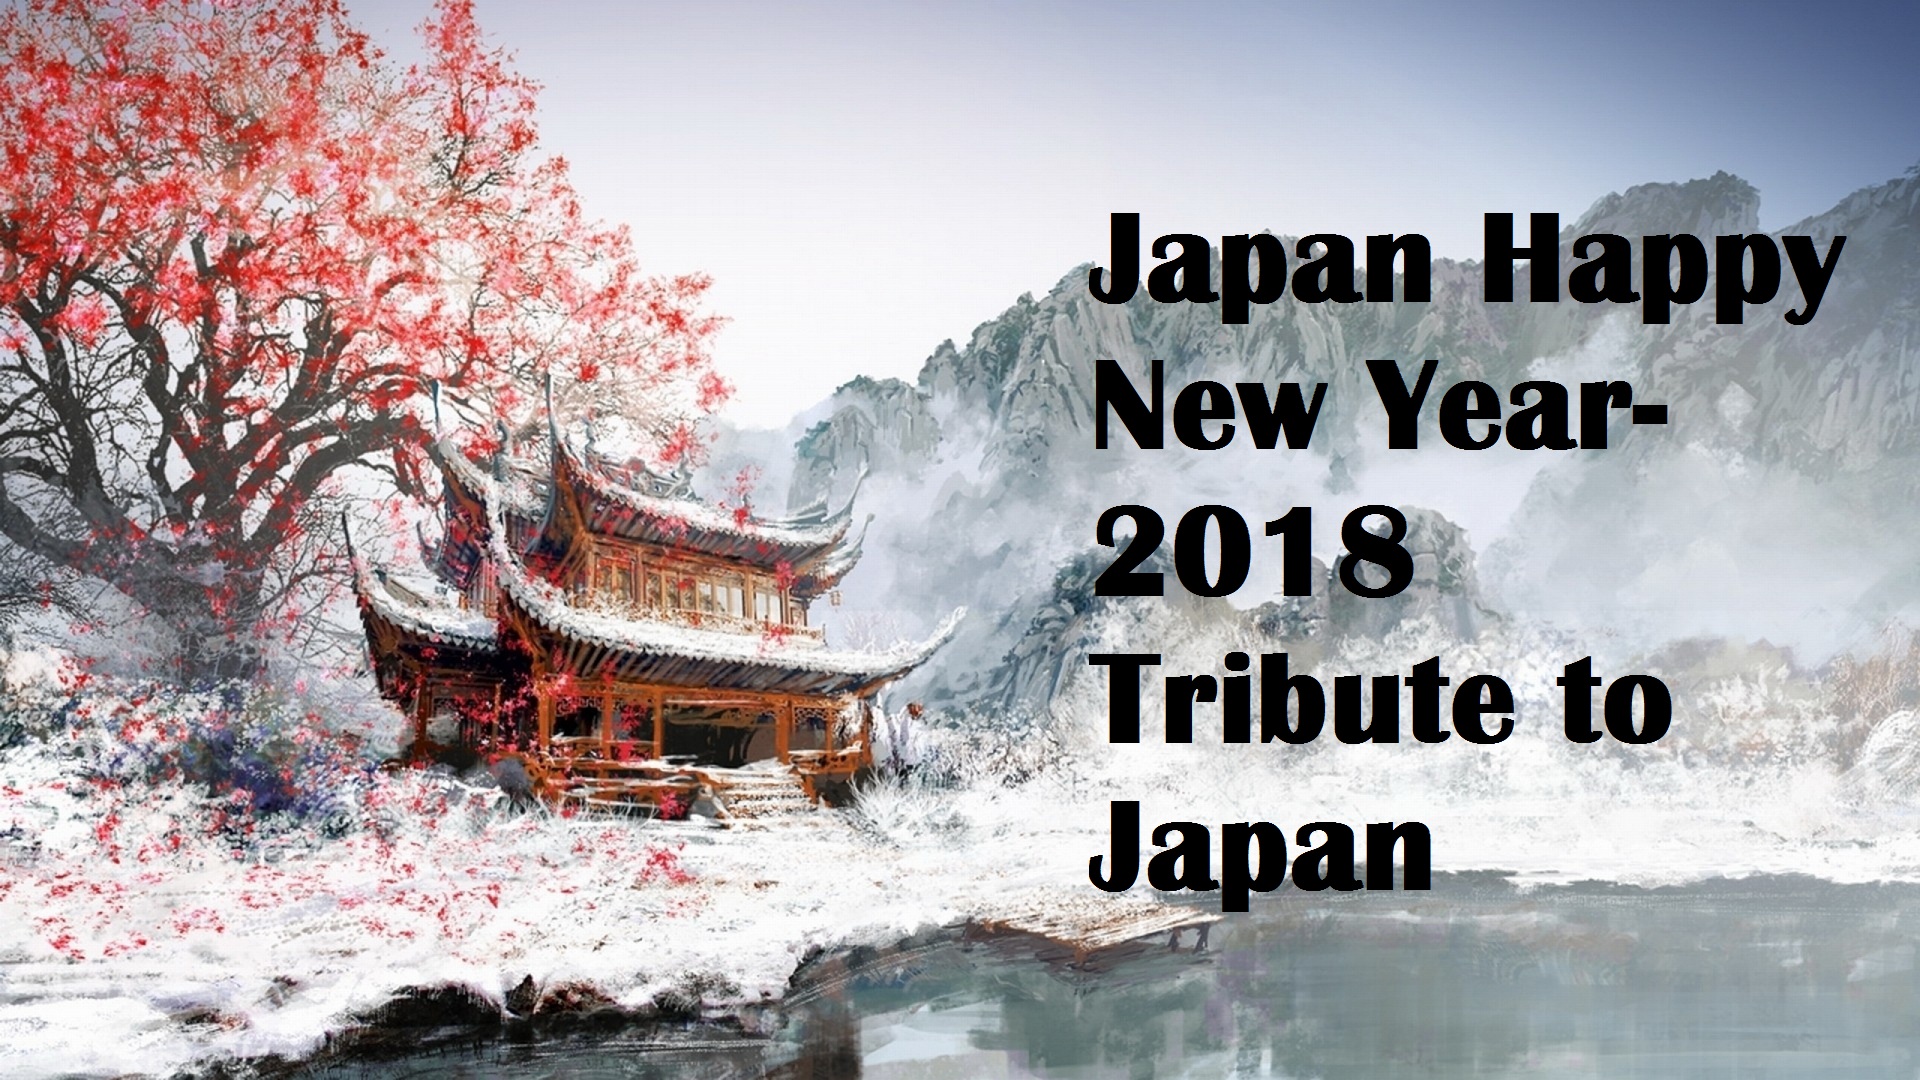 Japan-2018-Happy-New-Year-Hd-Images-Wallpapers